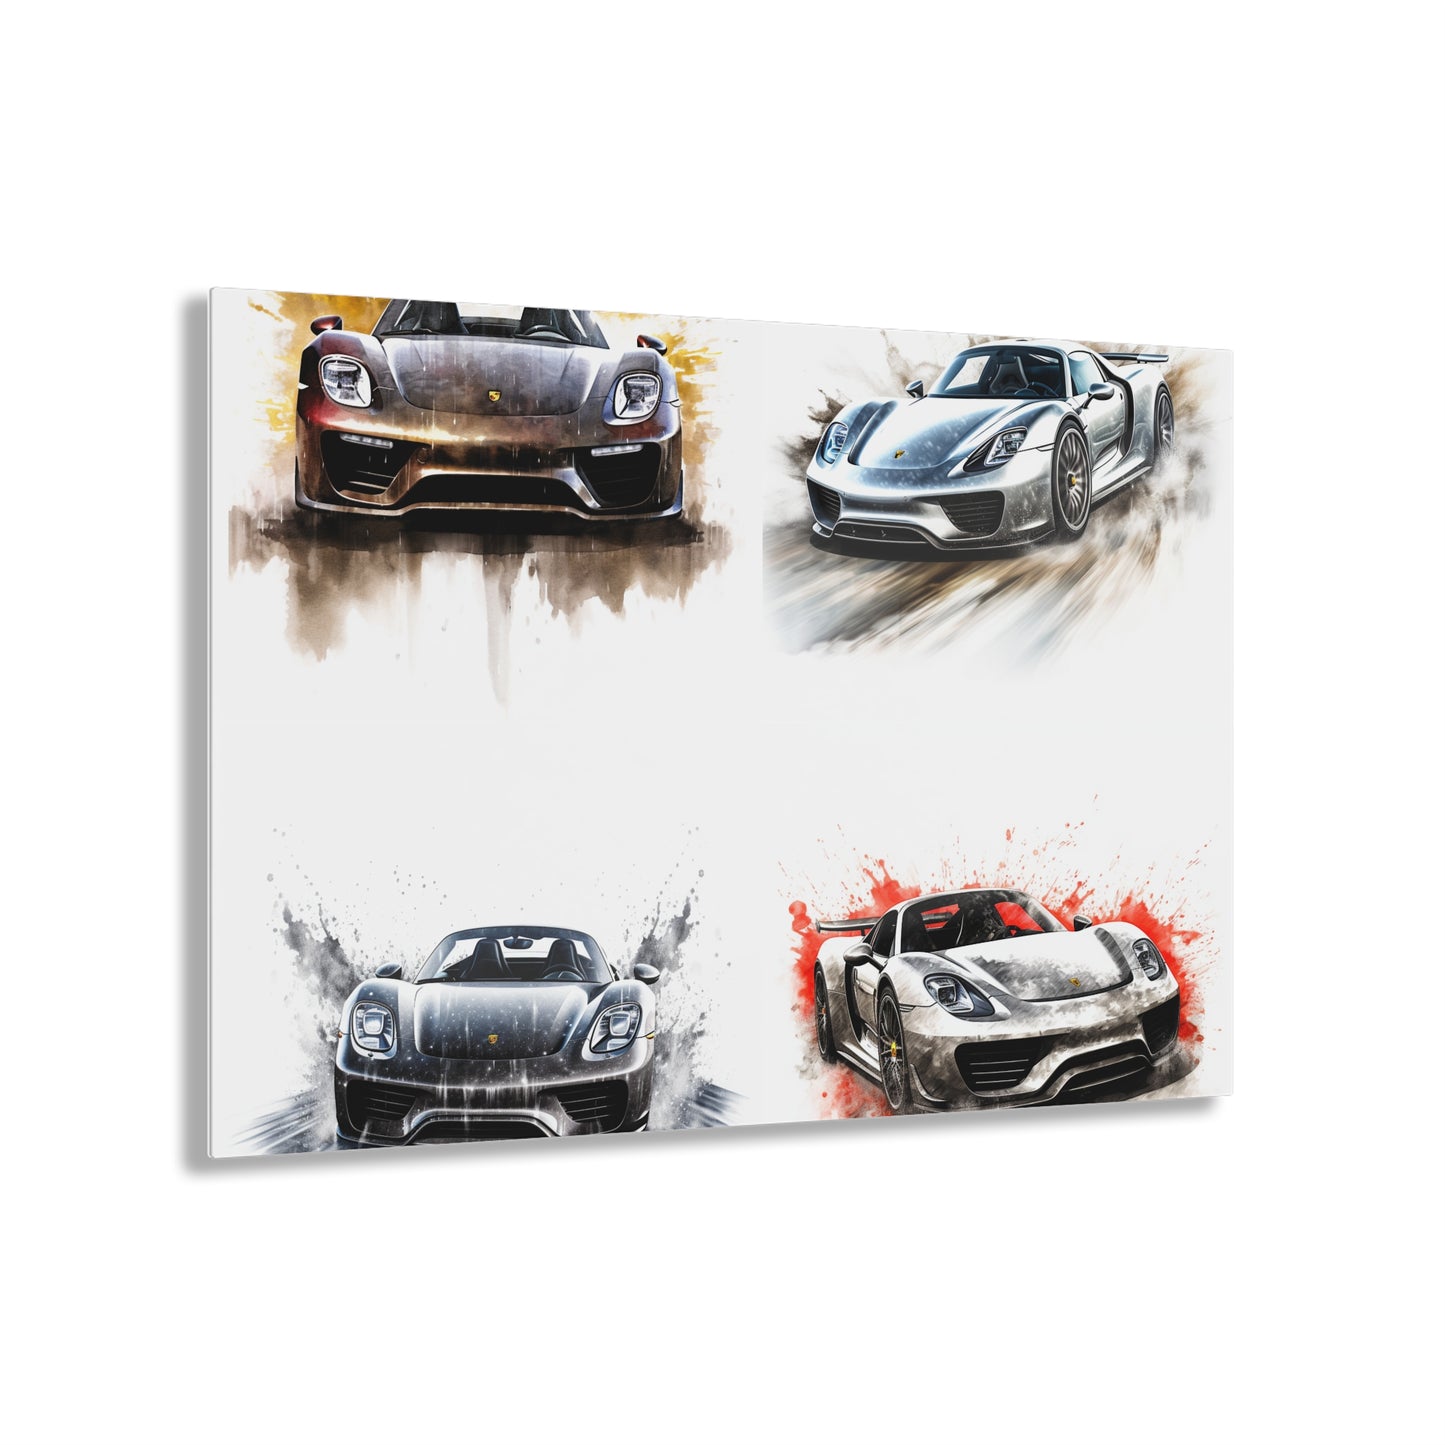 Acrylic Prints 918 Spyder white background driving fast with water splashing 5